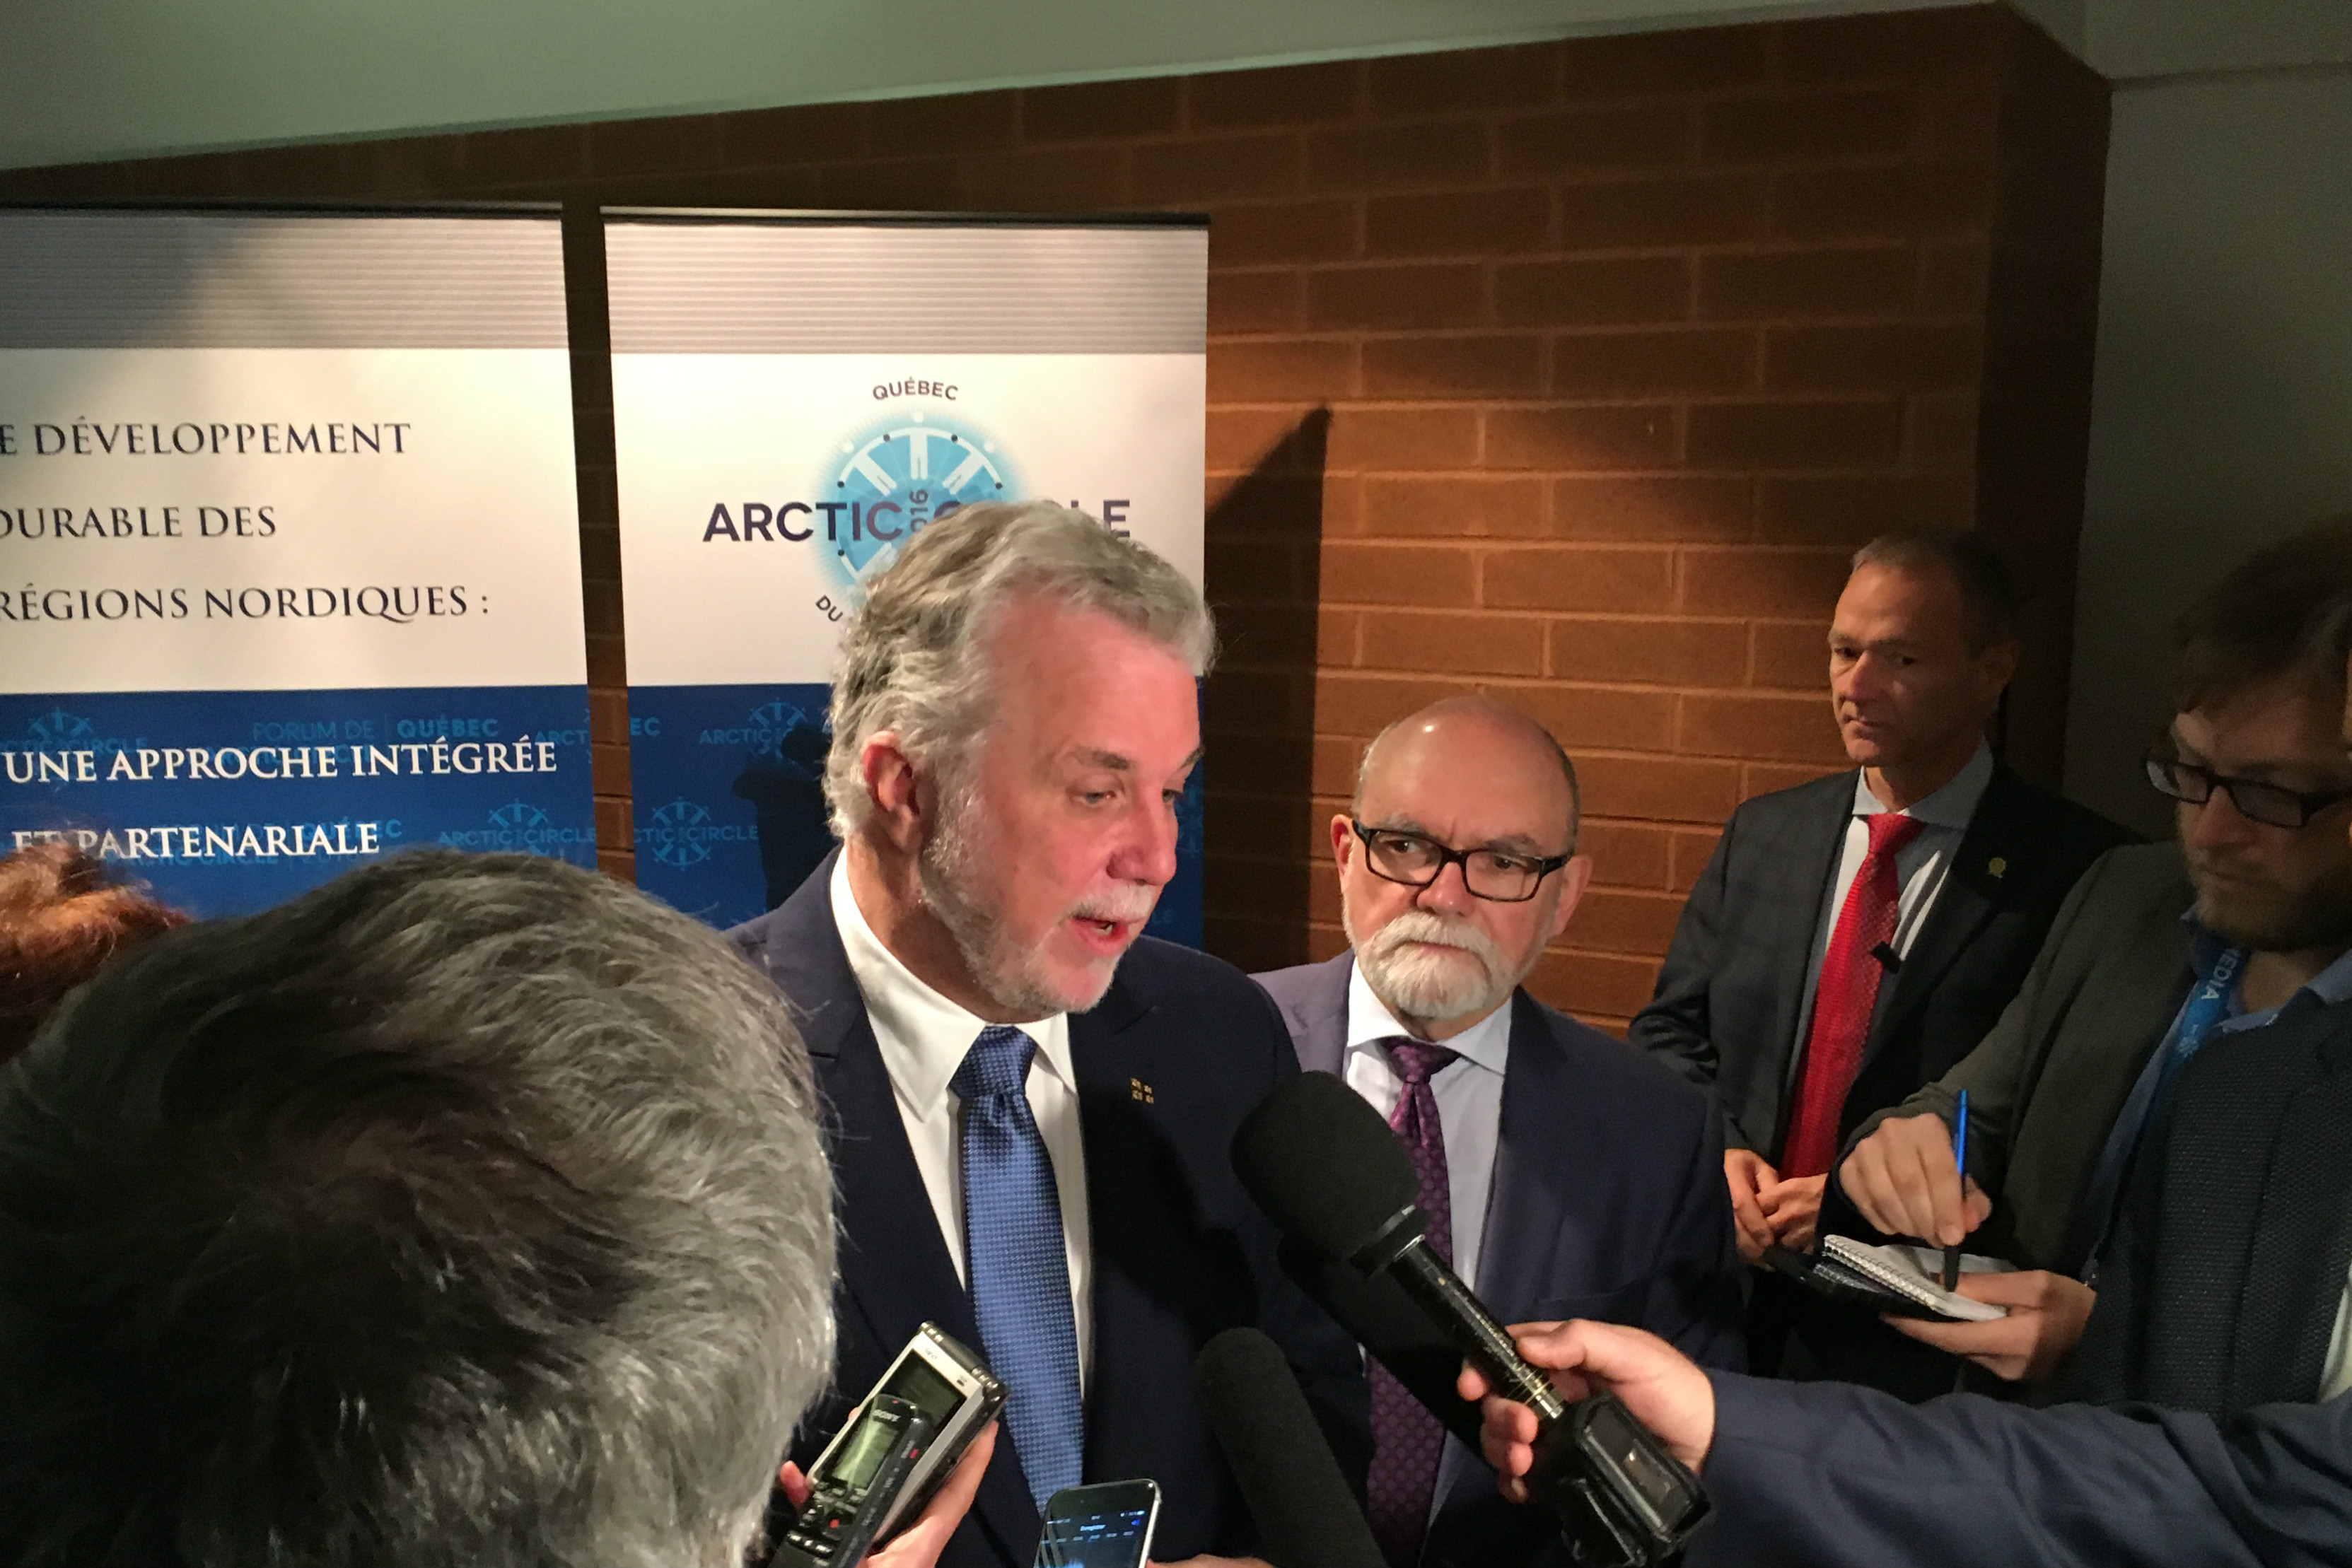 Quebec Premier Philippe Couillard answers questions from media at an Arctic Circle Forum event in Quebec City, Quebec, Dec. 12, 2016. (Krestia DeGeorge / Arctic Now)